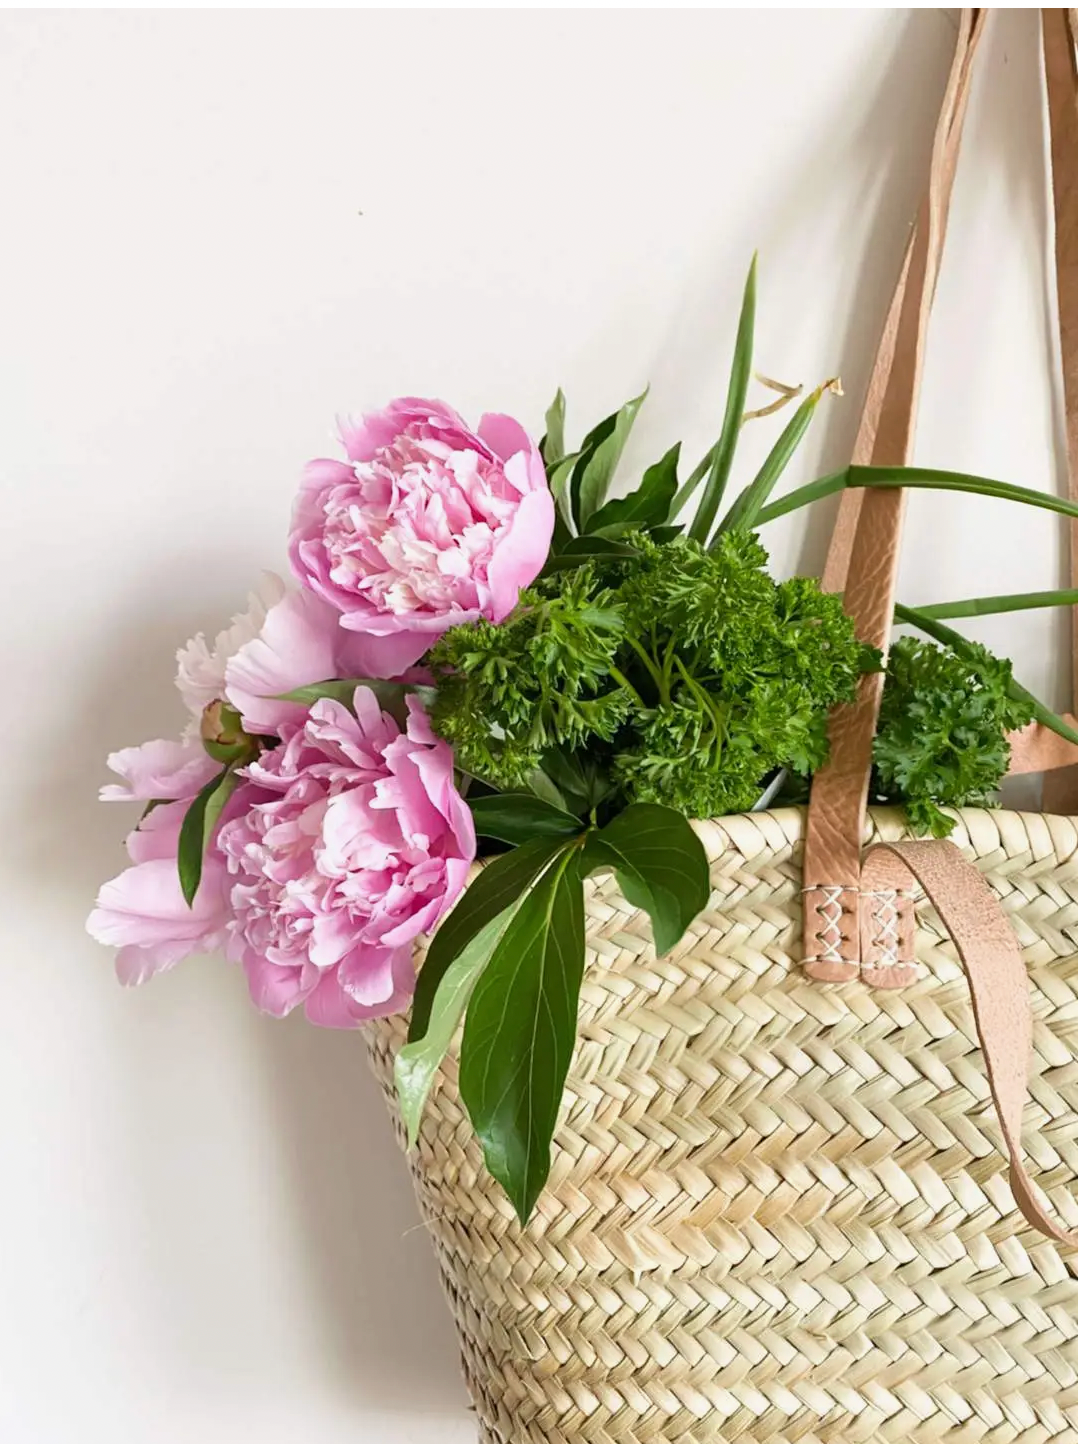 The Victoria Bag : Handmade Straw Bag with Natural Leather Straps (Short & Long)